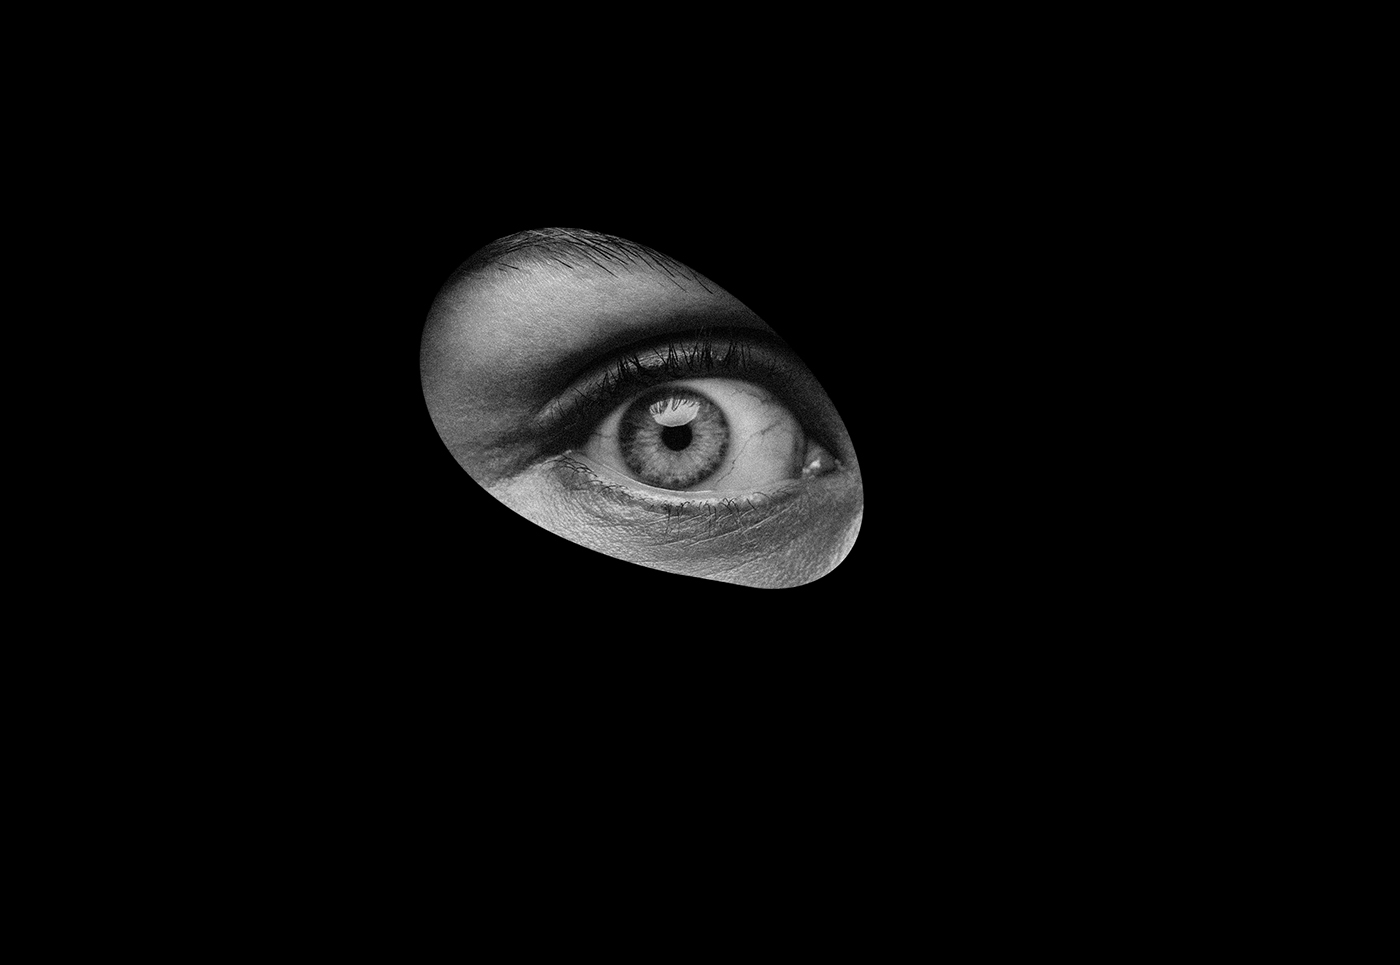 A black and white abstract image of an eye